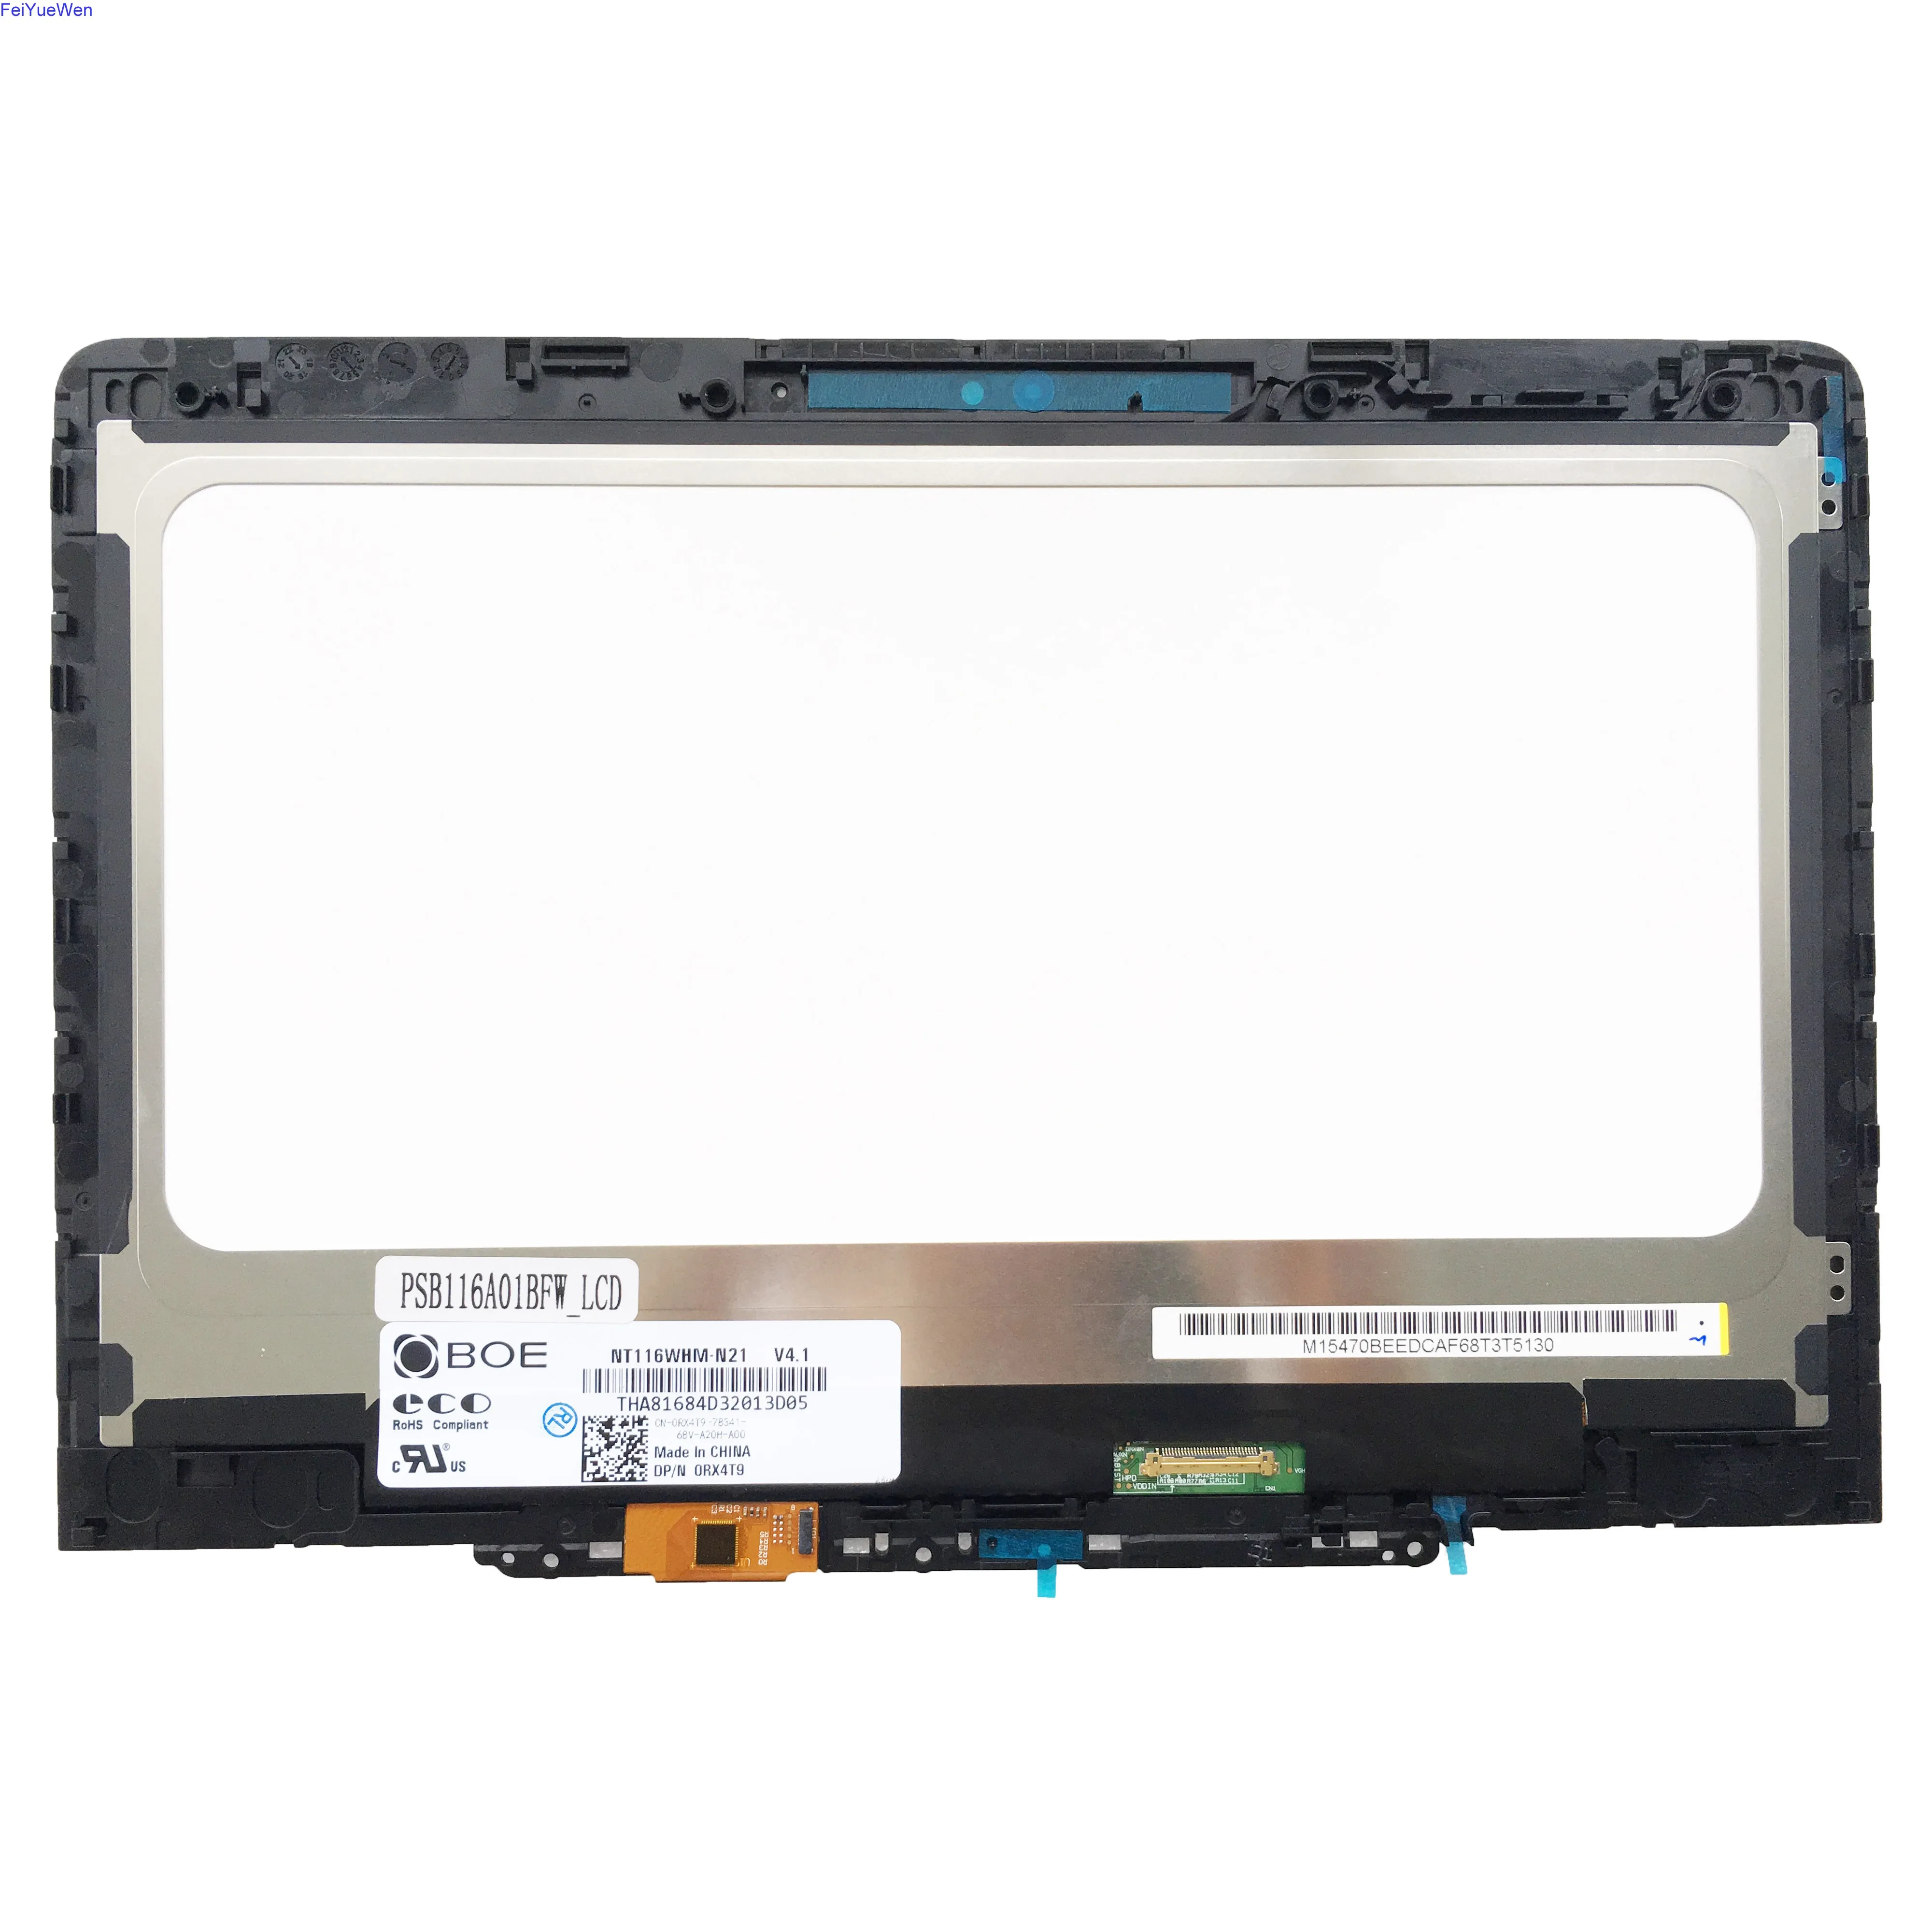  Led Fit For Lenovo 300e Chromebook Lcd Touch Screen Panel W/bezel -  Buy  Led Fit For Lenovo 300e Chromebook Lcd Touch Screen Panel,Fit For  Lenovo 300e Chromebook Lcd Touch Screen